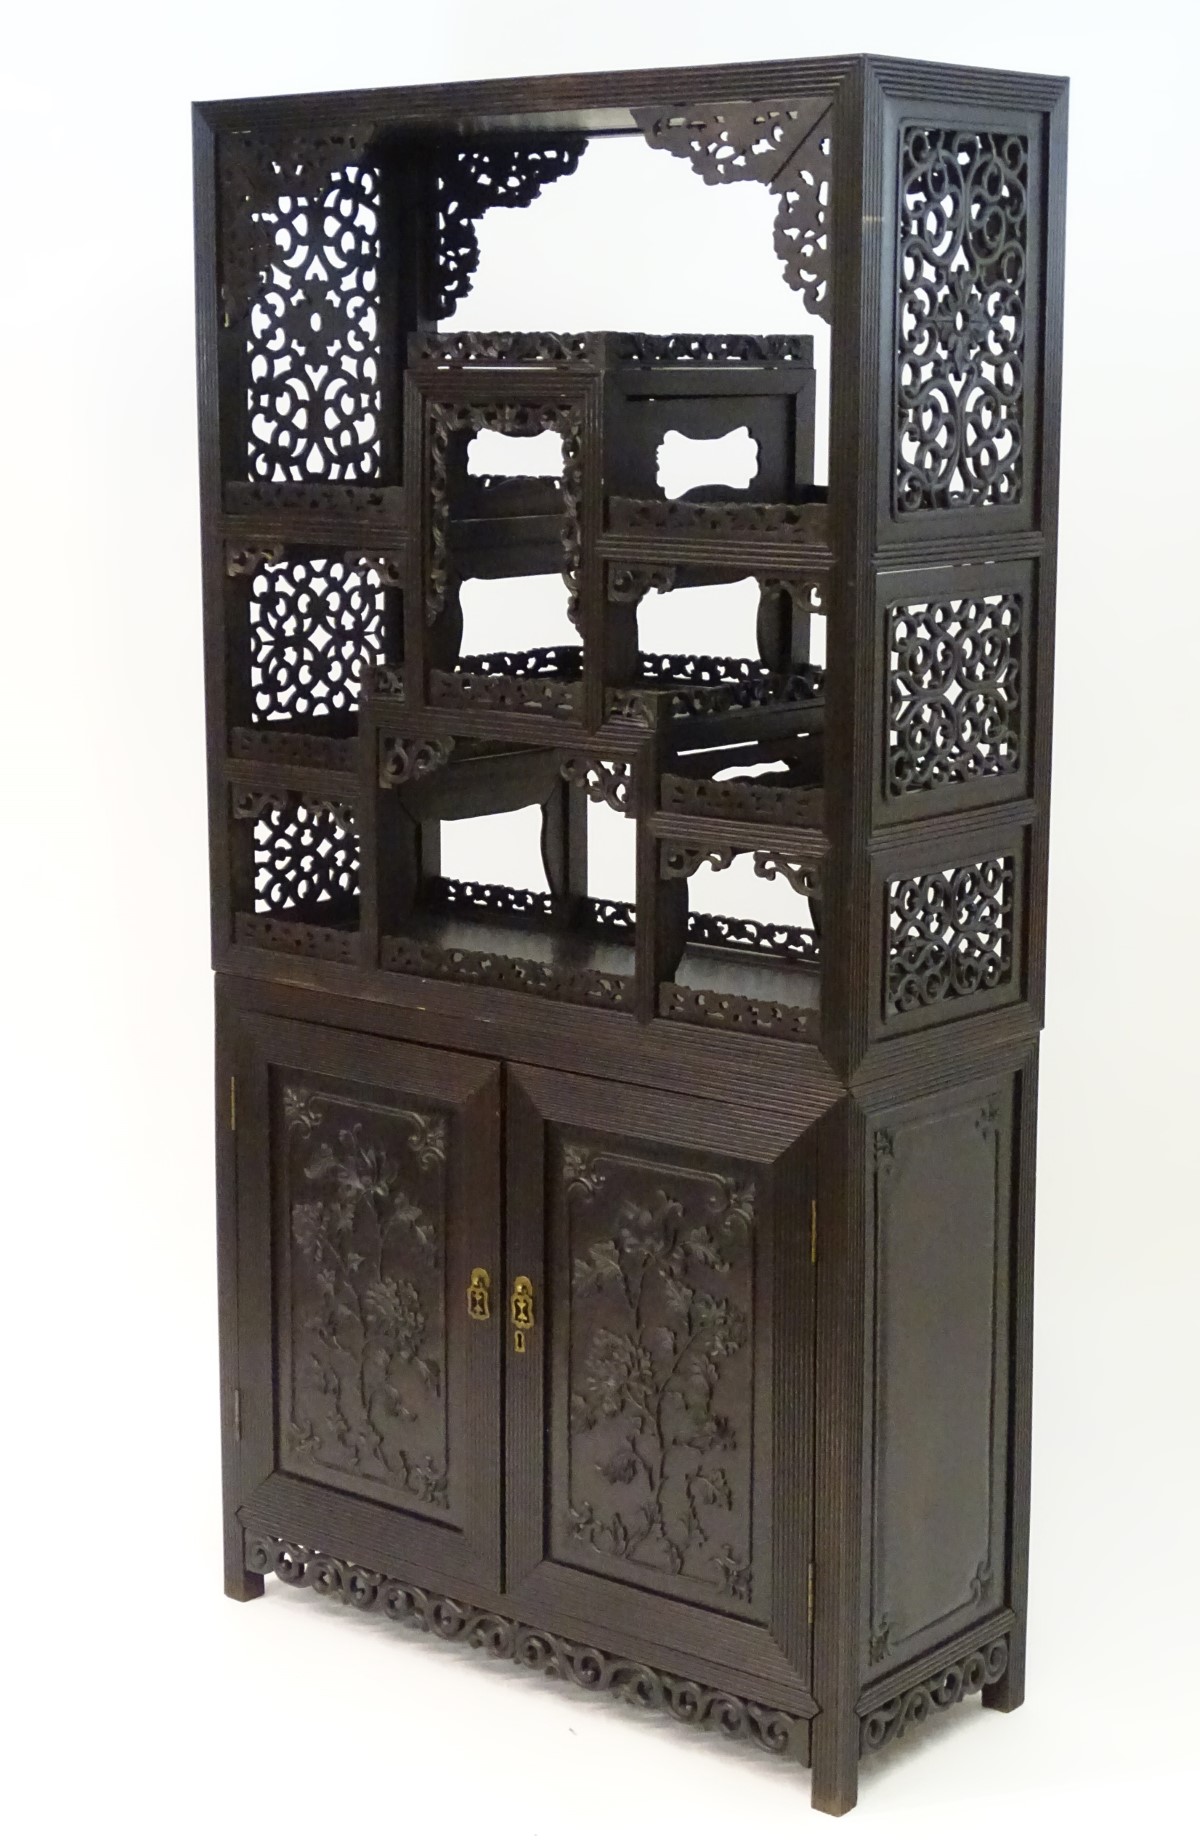 A late 19thC / early 20thC Chinese hardwood cabinet with open display shelves resting on a cupboard - Image 2 of 10